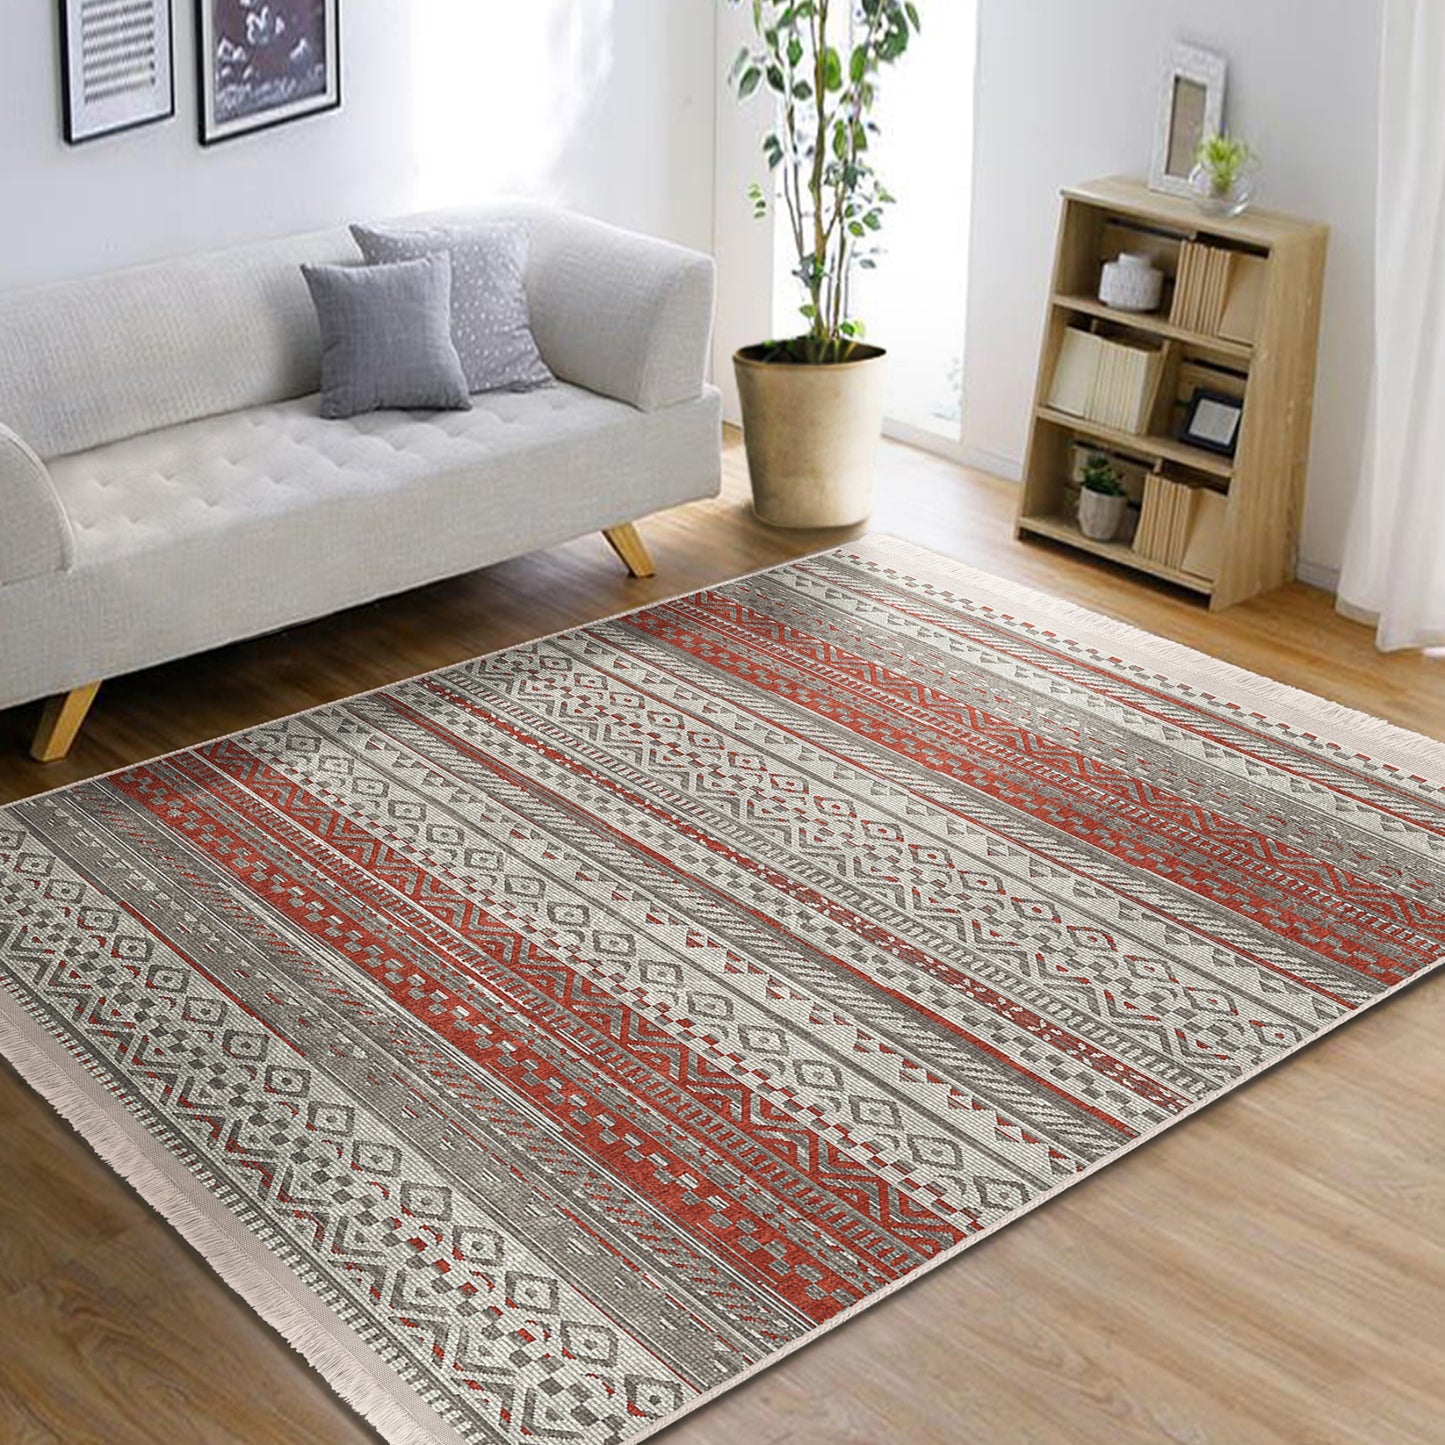 Classic Moroccan Rug for a Stylish Living Space